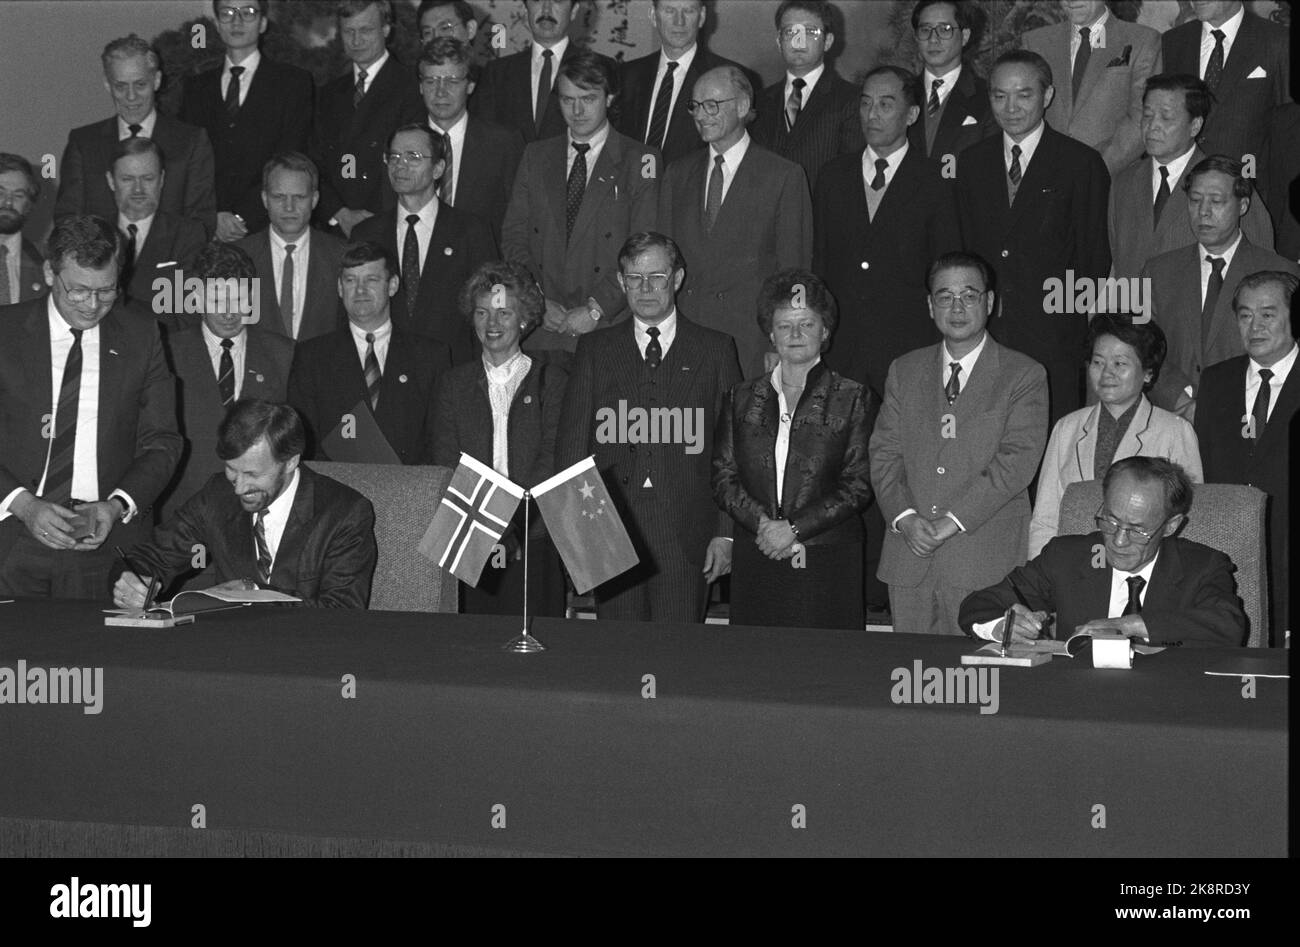 China January 20, 1988. Prime Minister Gro Harlem Brundtland overturns the signing of an agreement between Statoil and the Chinese state oil company. According to the agreement, Statoil will be able to test drill in the South China Sea. Here director Stig Bergset (TV) and CEO. In the Chinese CNOOC, Mr. Zhoug Yiming. Behind Prime Minister Gro Harlem Brundtland and Chinese Prime Minister Li Peng. Photo: Inge Gjellesvik / NTB / NTB Stock Photo